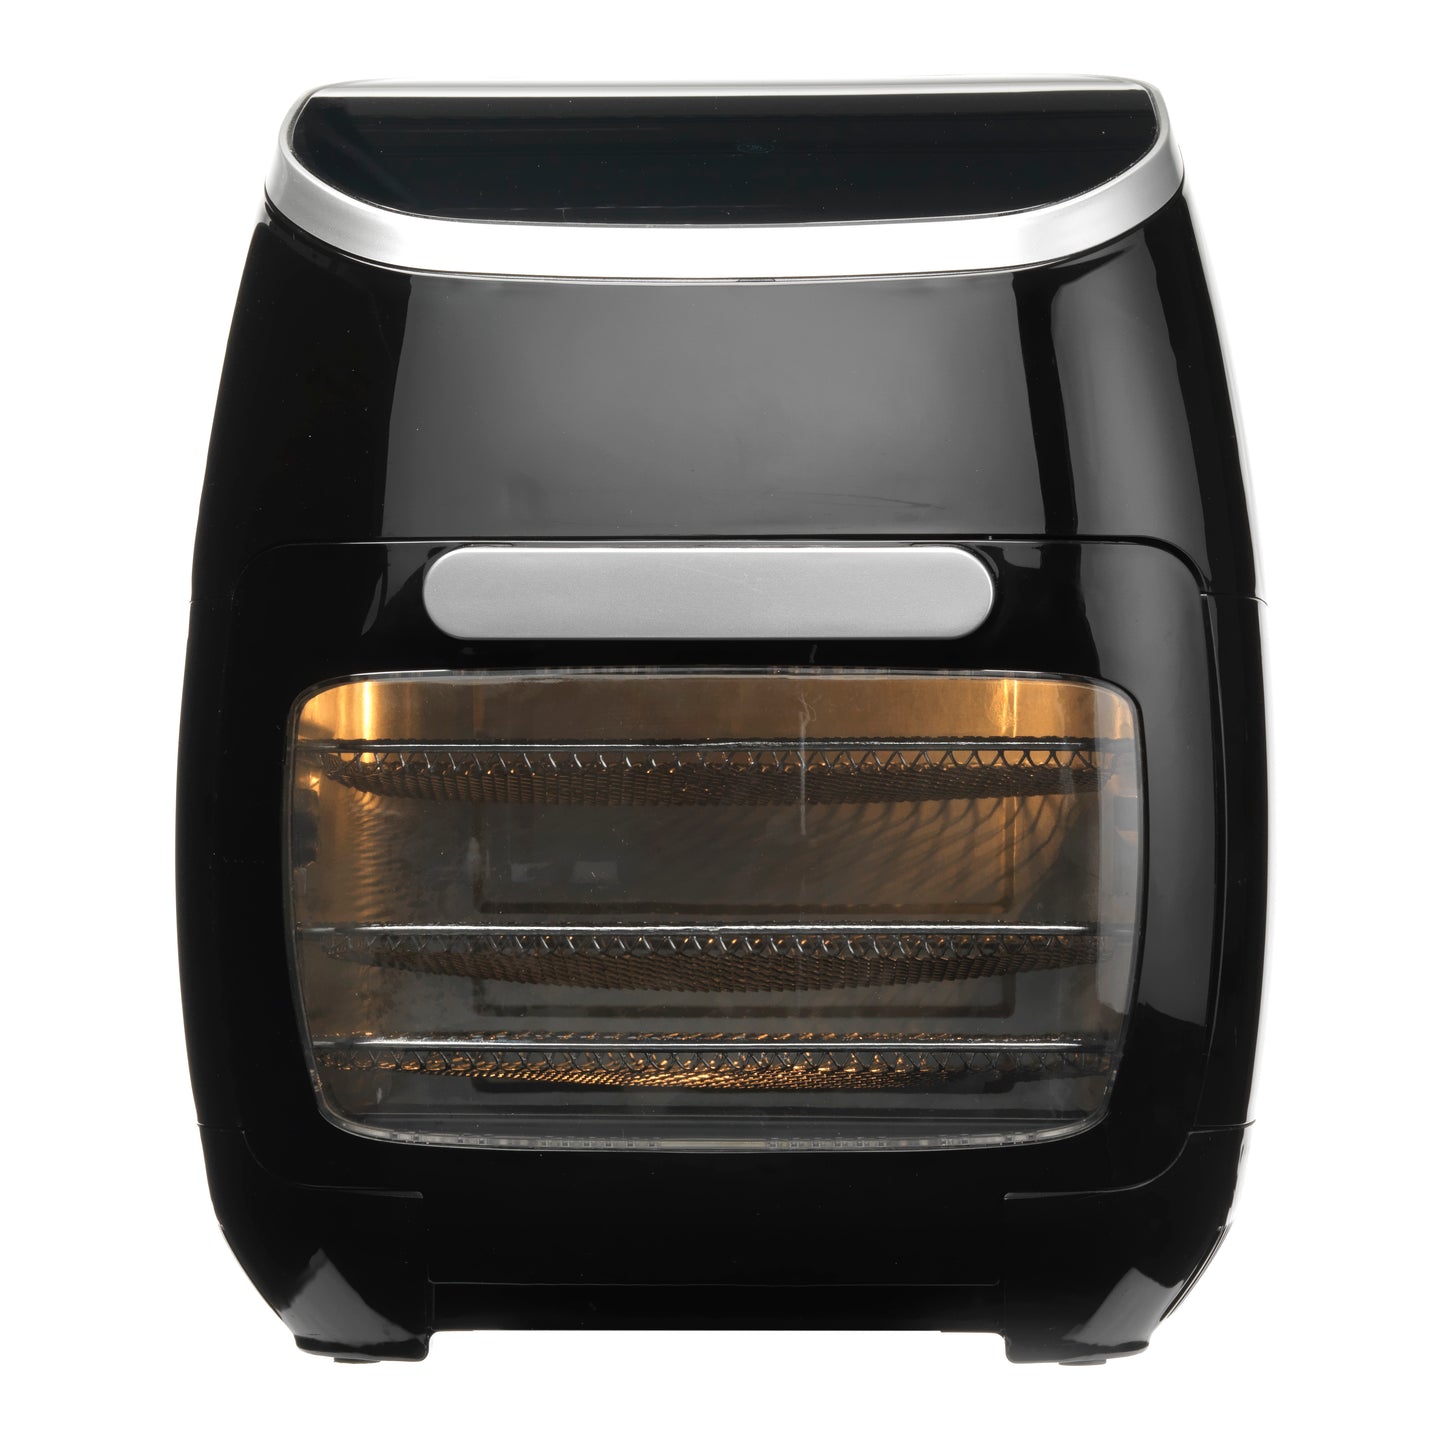 Trebs 99364 - Multifunctional Hot Airfryer Oven